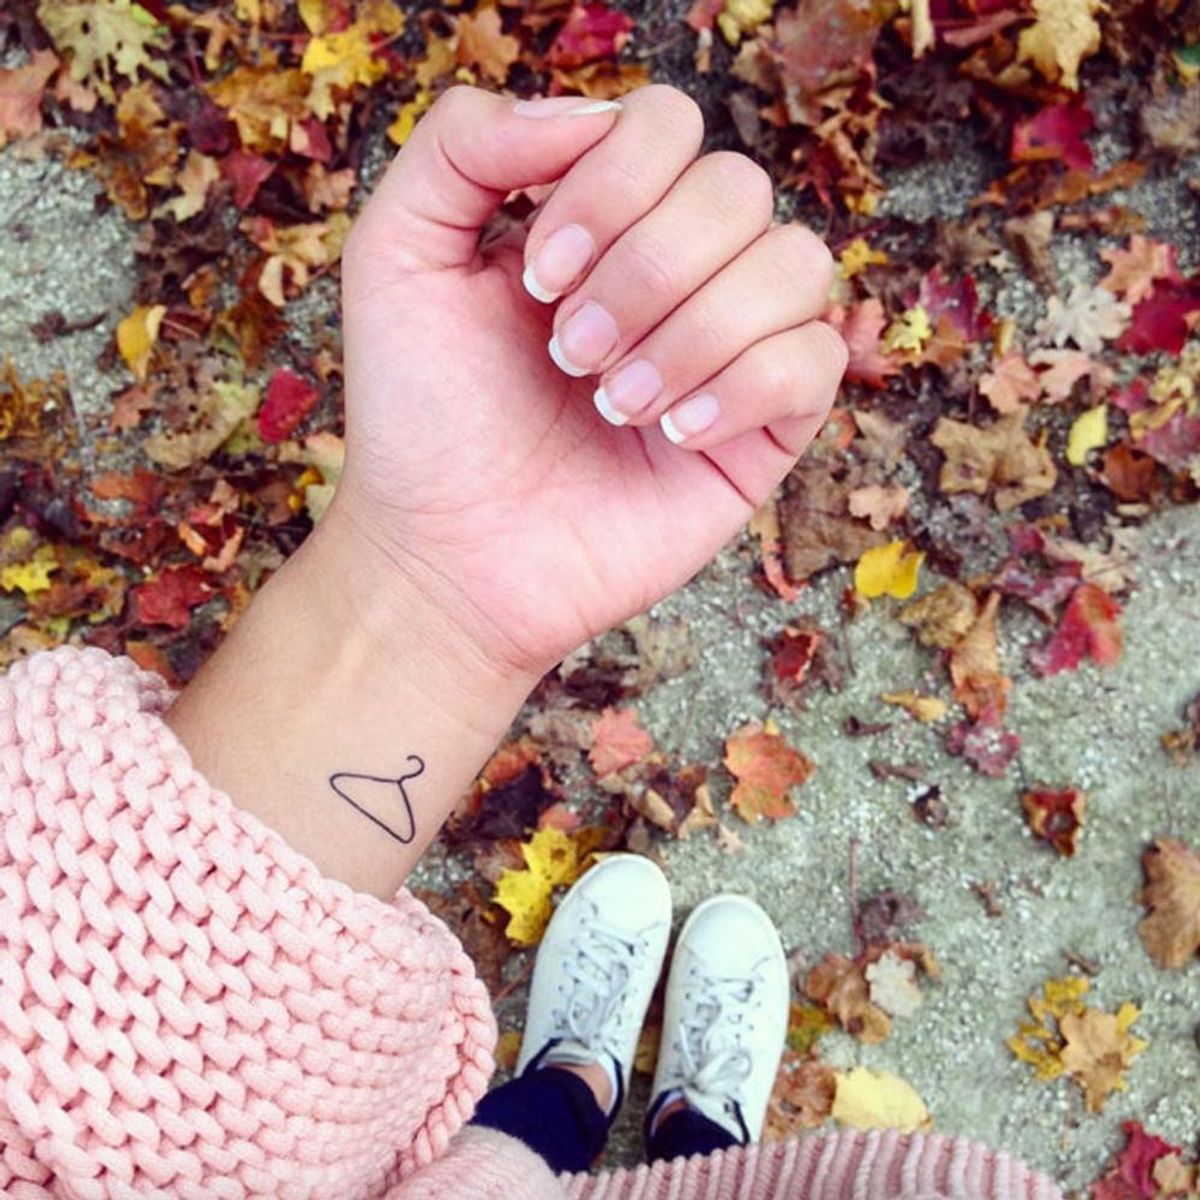 12 Minimalist Line Tattoos That Show Less Is More